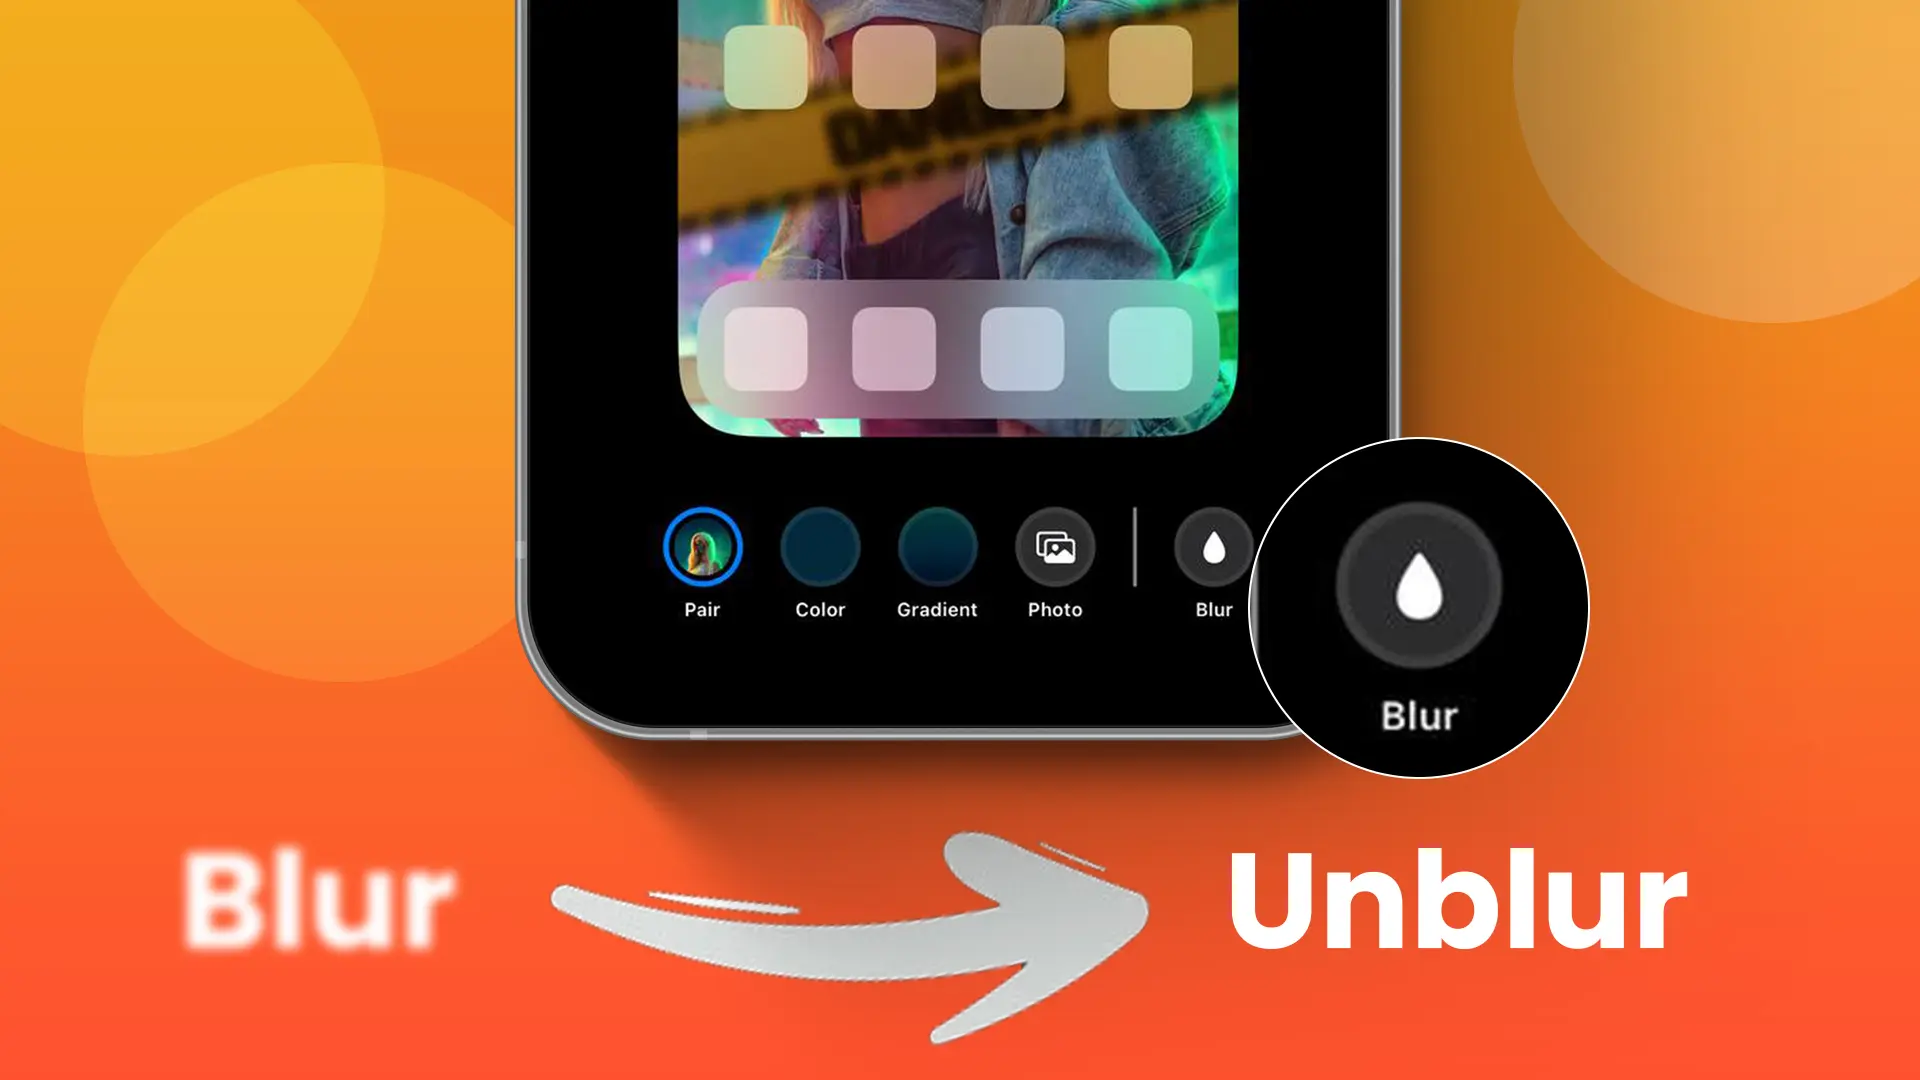 How to Unblur Home Screen Wallpaper on iPhone